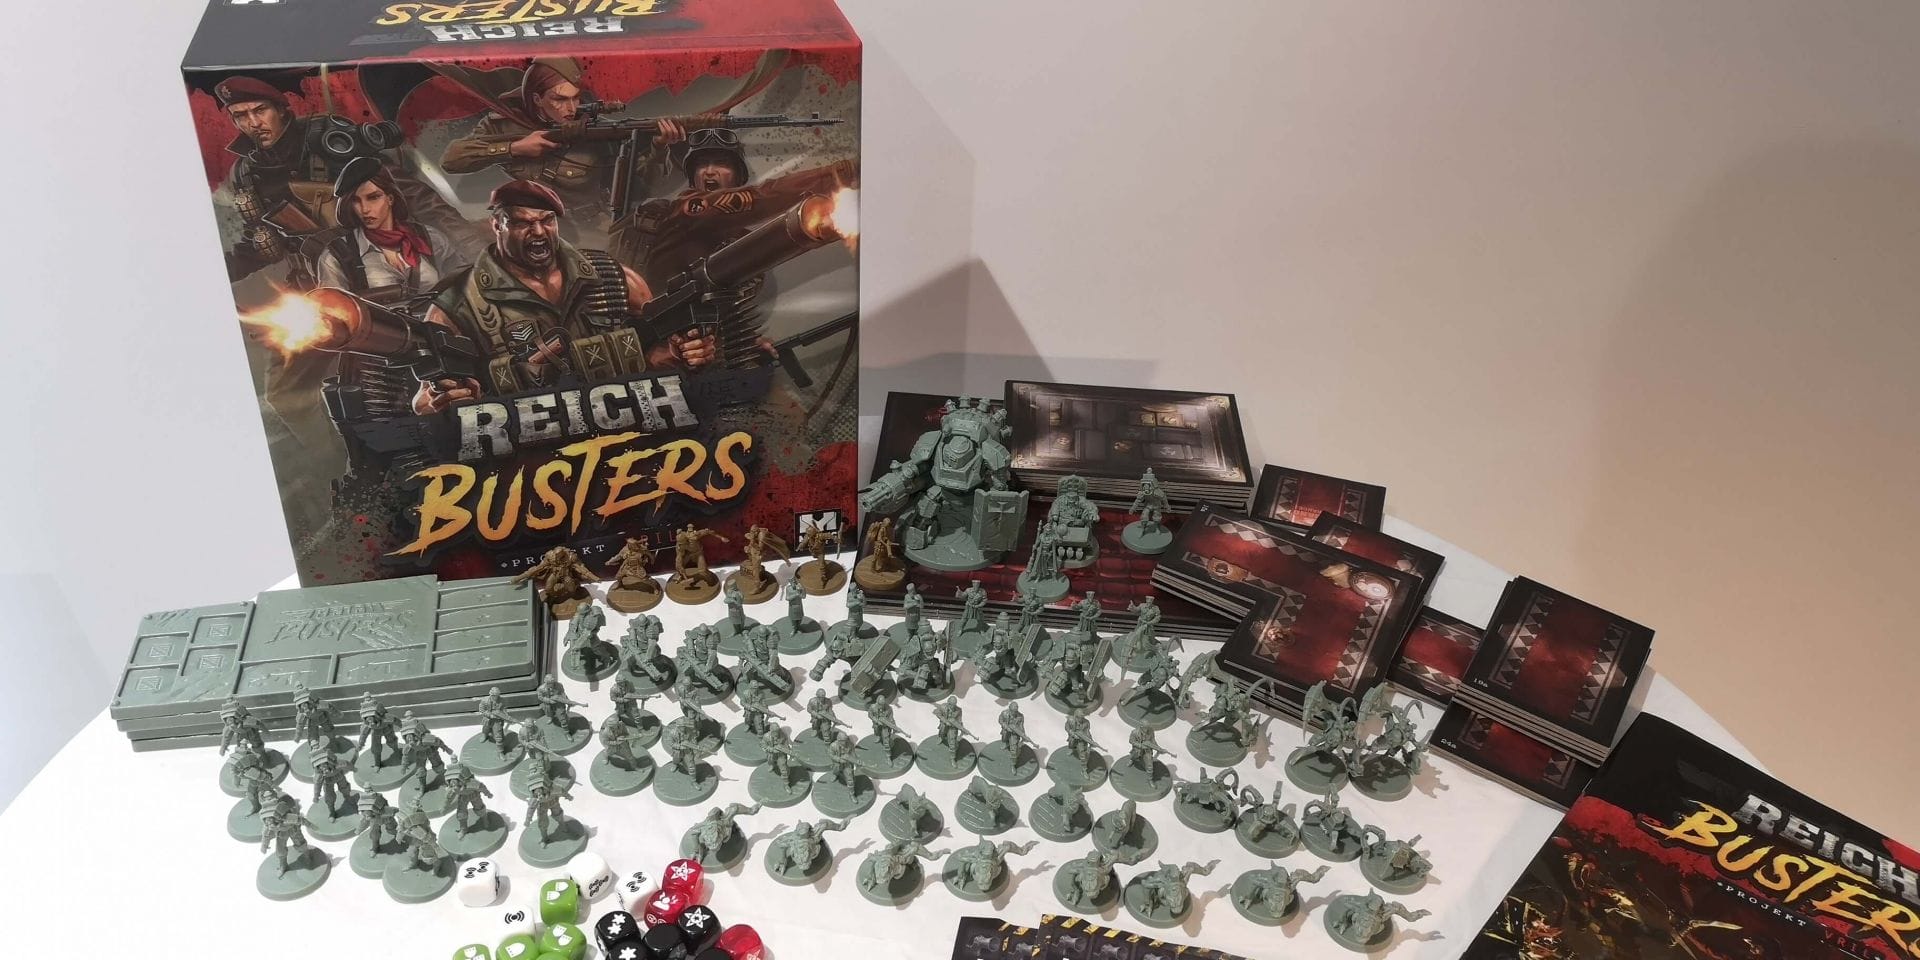 Reichbusters Core Set